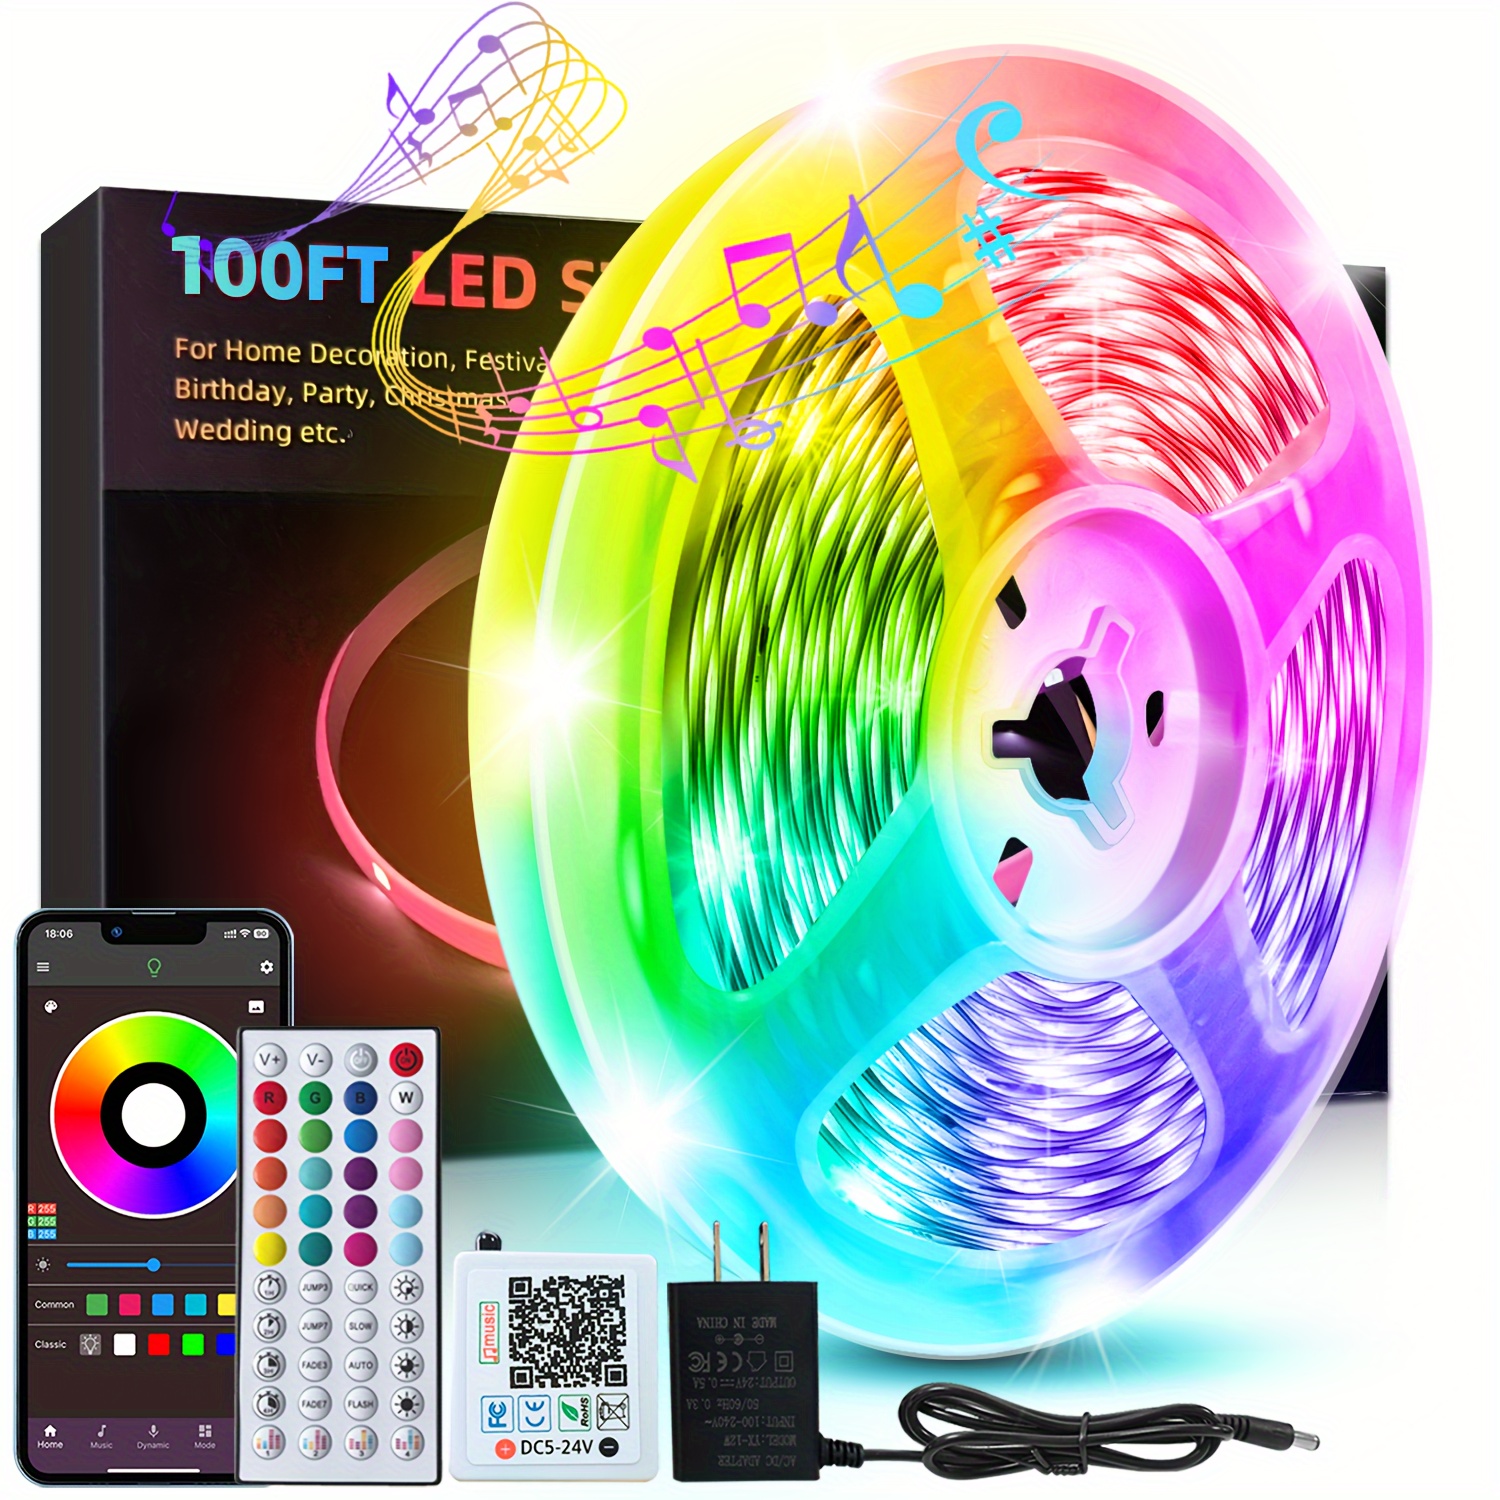 

200ft Led Lights For Bedroom, With App Control And Remote 44 Keys, Can Music Sync Color Change, Withe Timer, For Room Decor, Party Decor, Birthday Decor, Decor, Christmas Decor